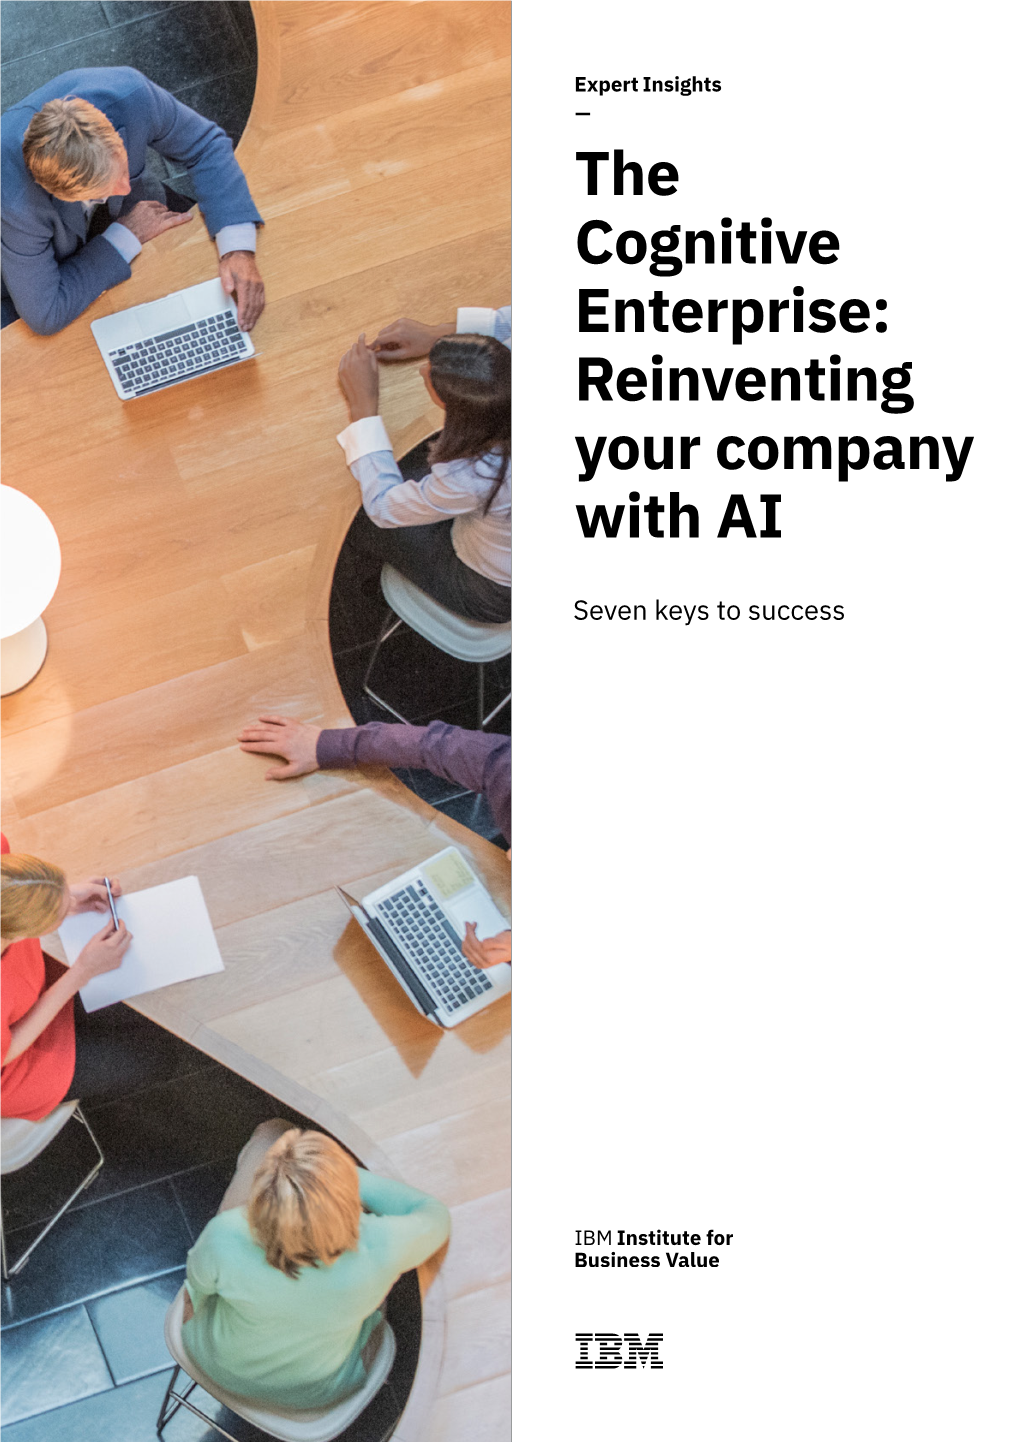 The Cognitive Enterprise: Reinventing You Company with AI